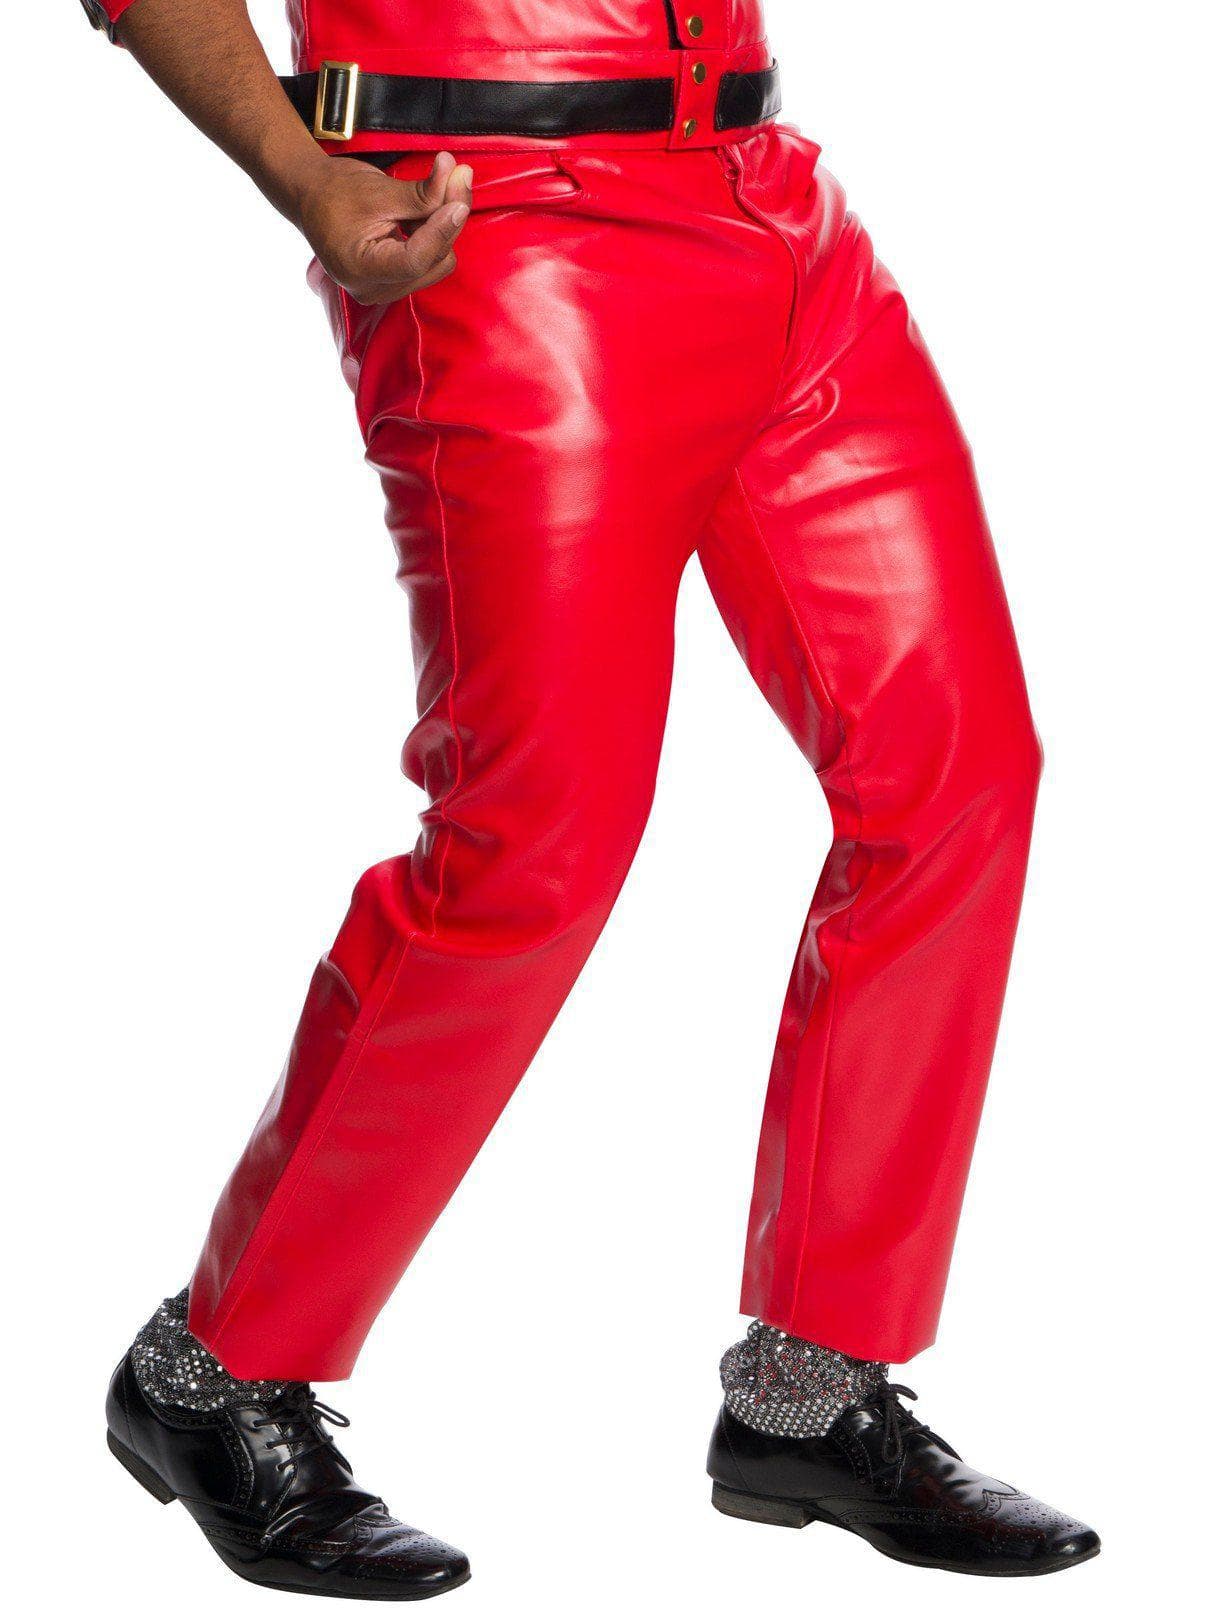 Adult Pleather Jeans Red Costume - costumes.com